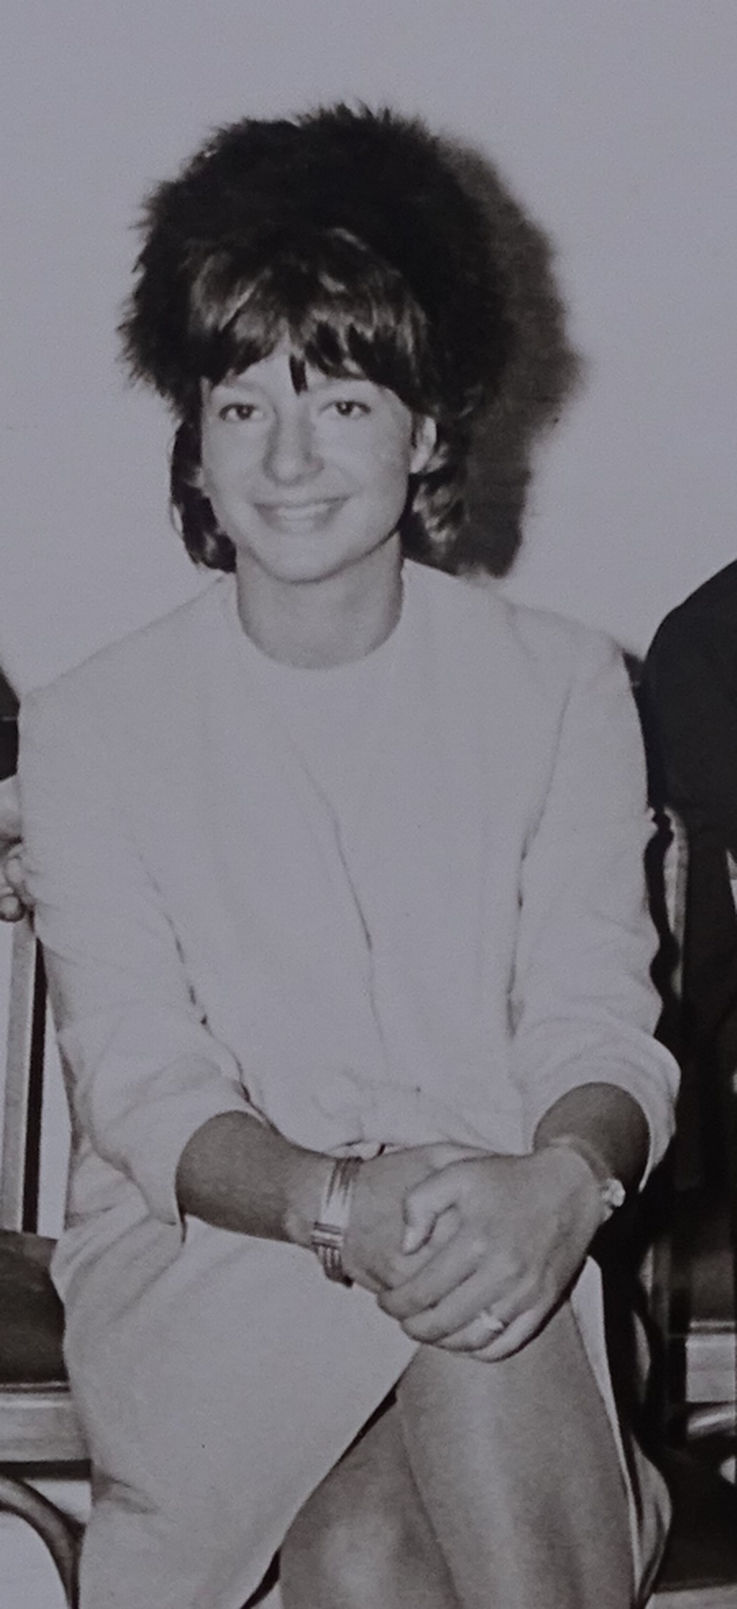 Brigitte Vöster-Alber in the 1960s, shortly before becoming Managing Director